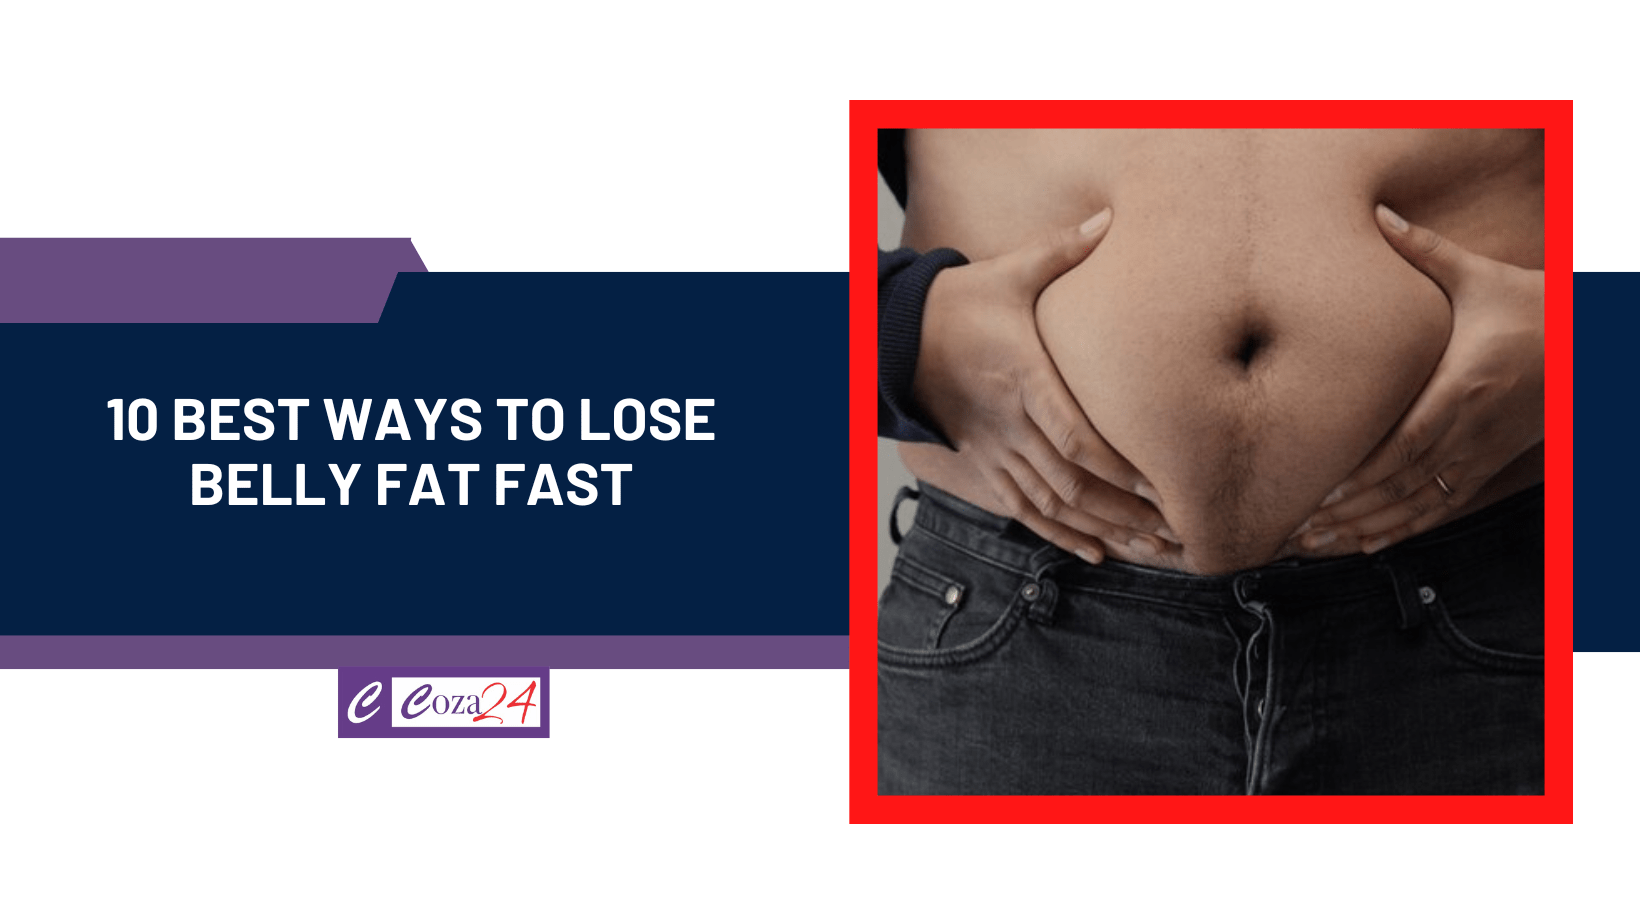 10 BEST Ways to Lose Belly Fat Fast